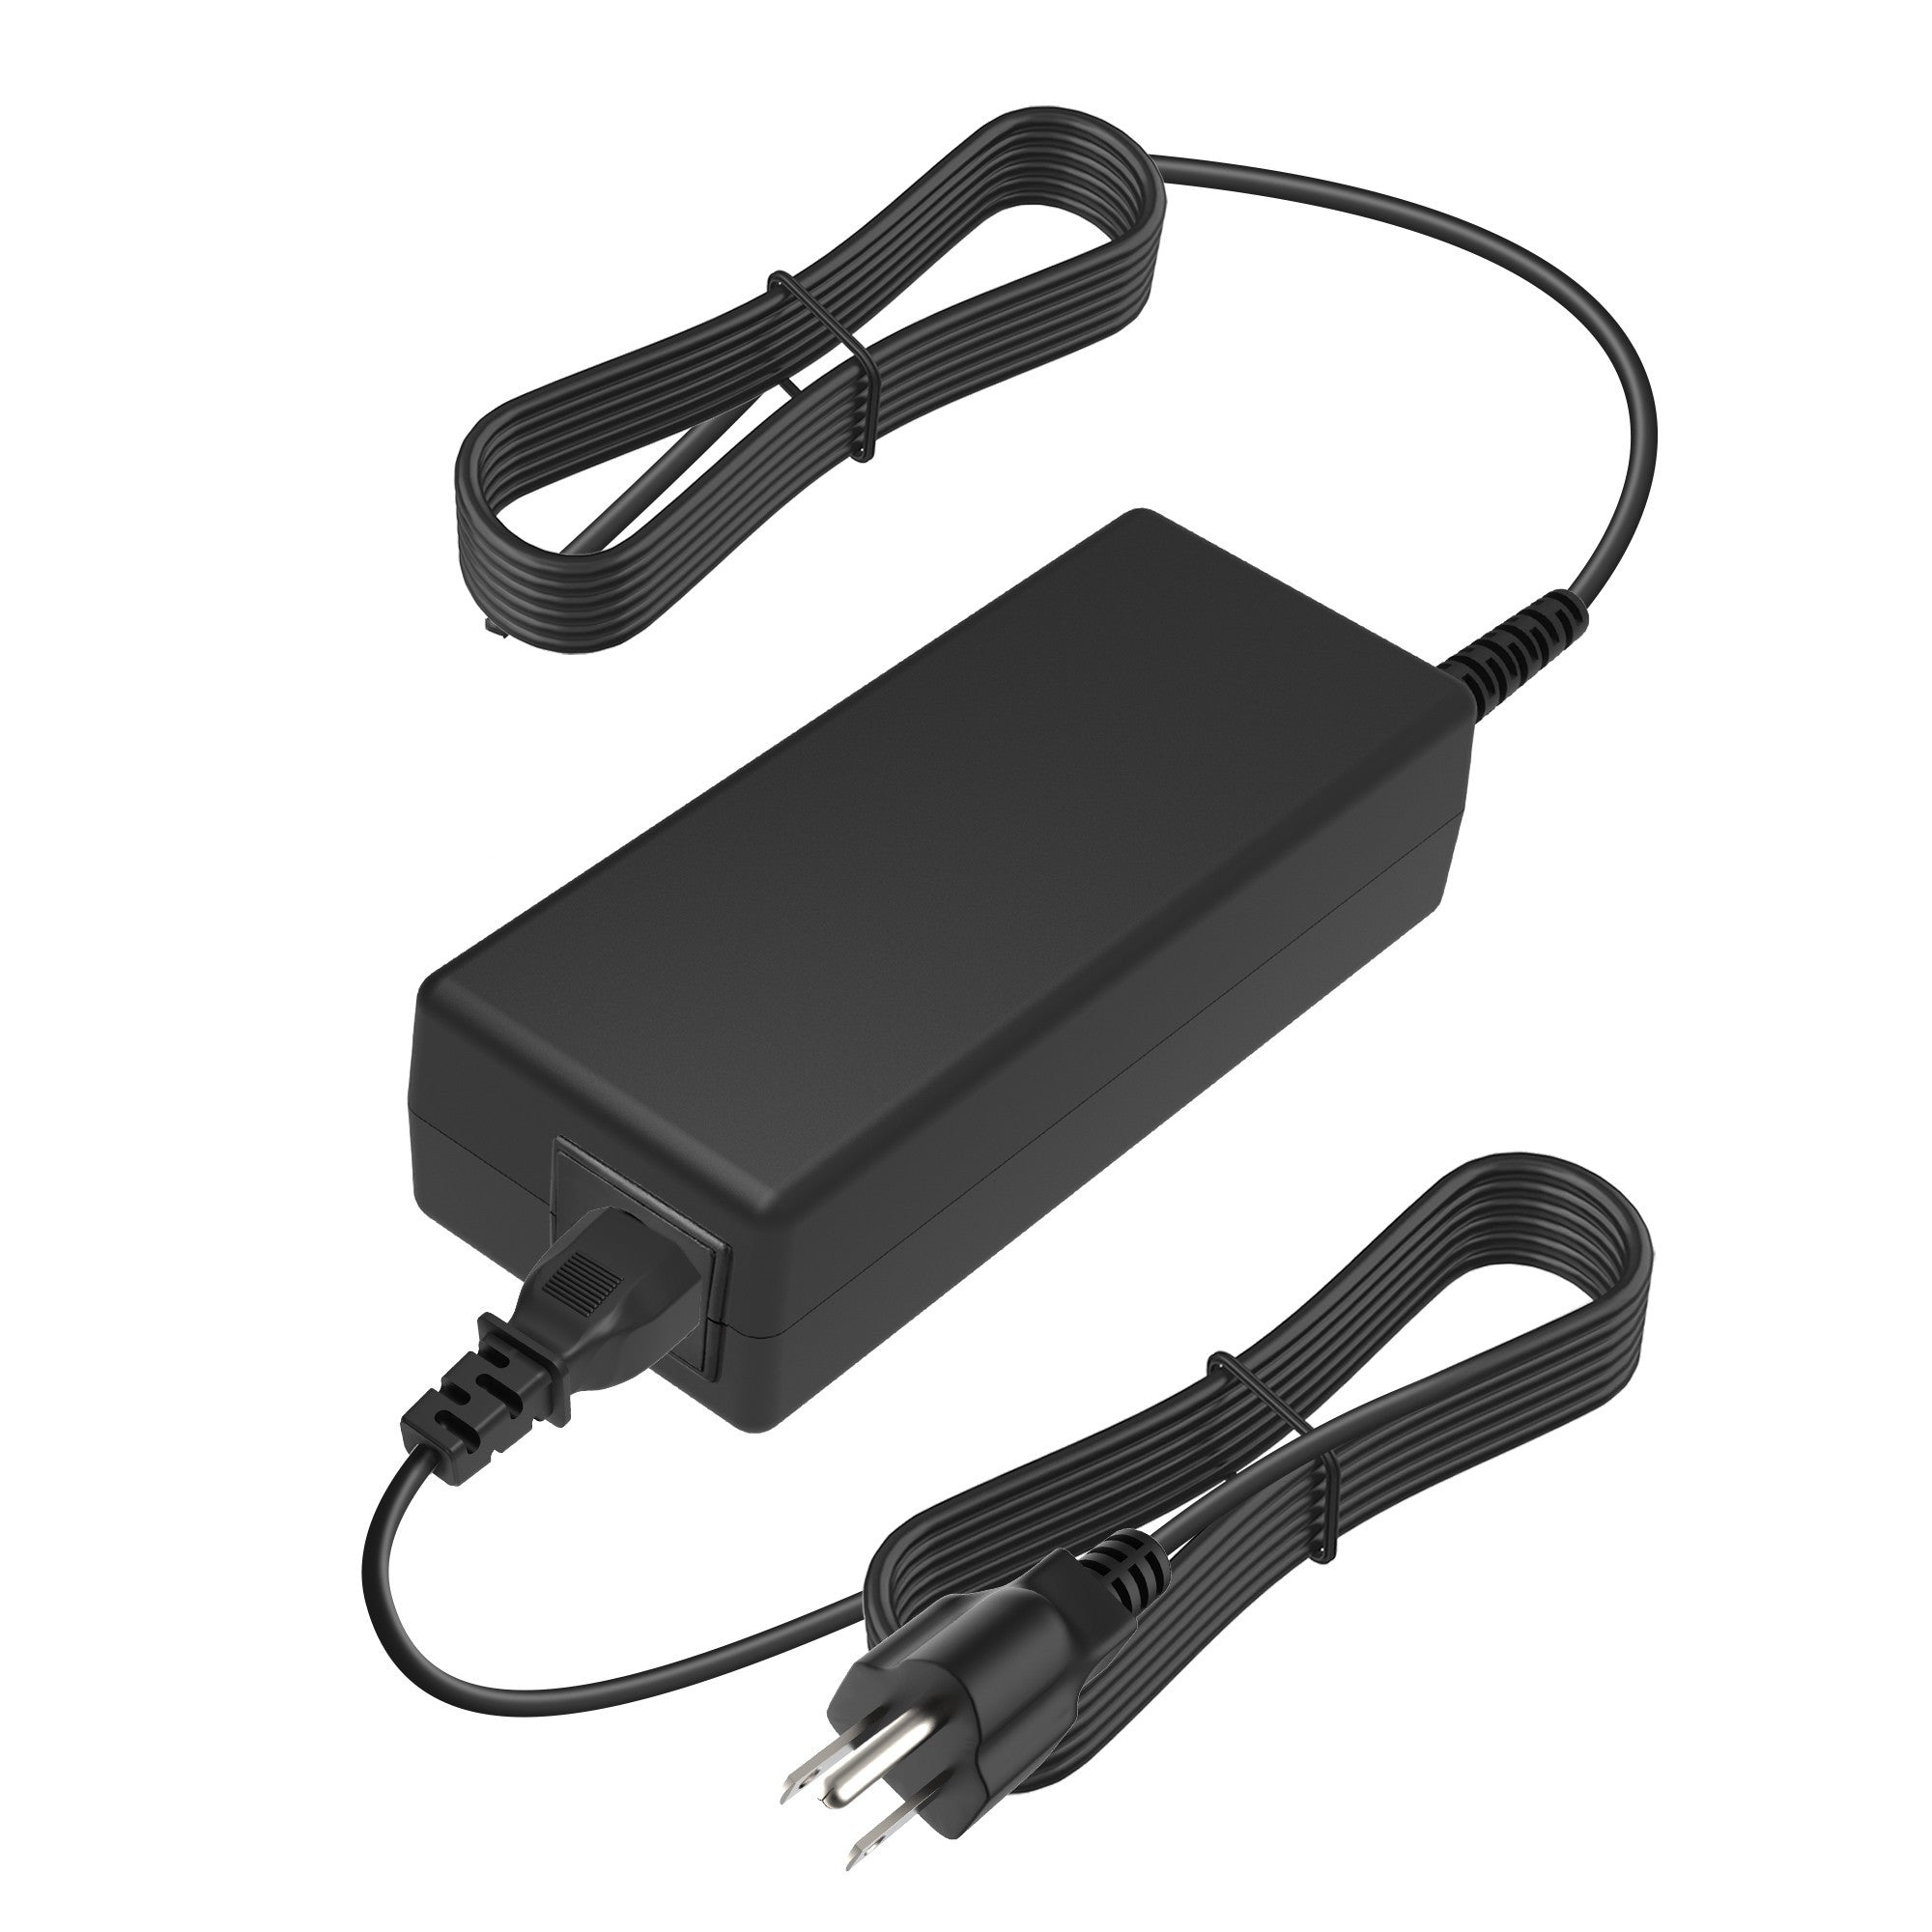 AbleGrid Ac Adapter Compatible with Gateway LSE0220A1990 QCD1ACYZZZTA43 PS-GT-400SD4 BTI 6506111R AP.09003.015 6506138R AP.09003.014 650615 ADP-90SB BB 6500722 6500706 ADP-90HB B 6506110R AP.09001.020